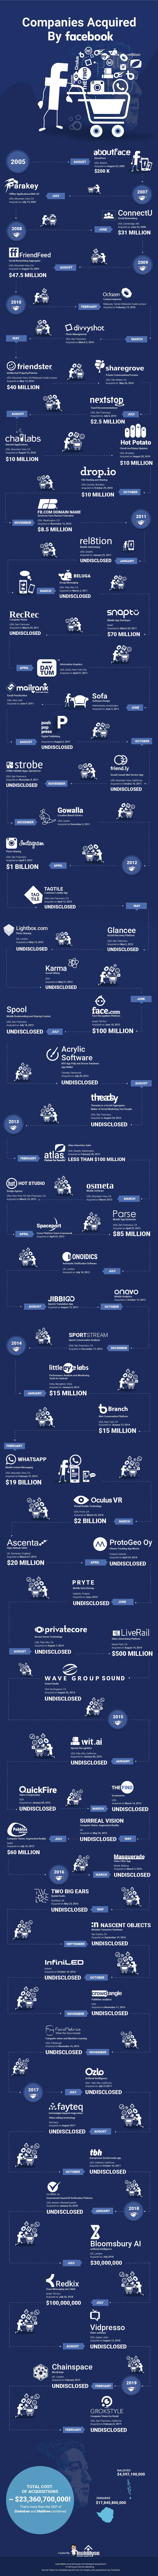 Facebook Acquisitions - companies acquired by Facebook